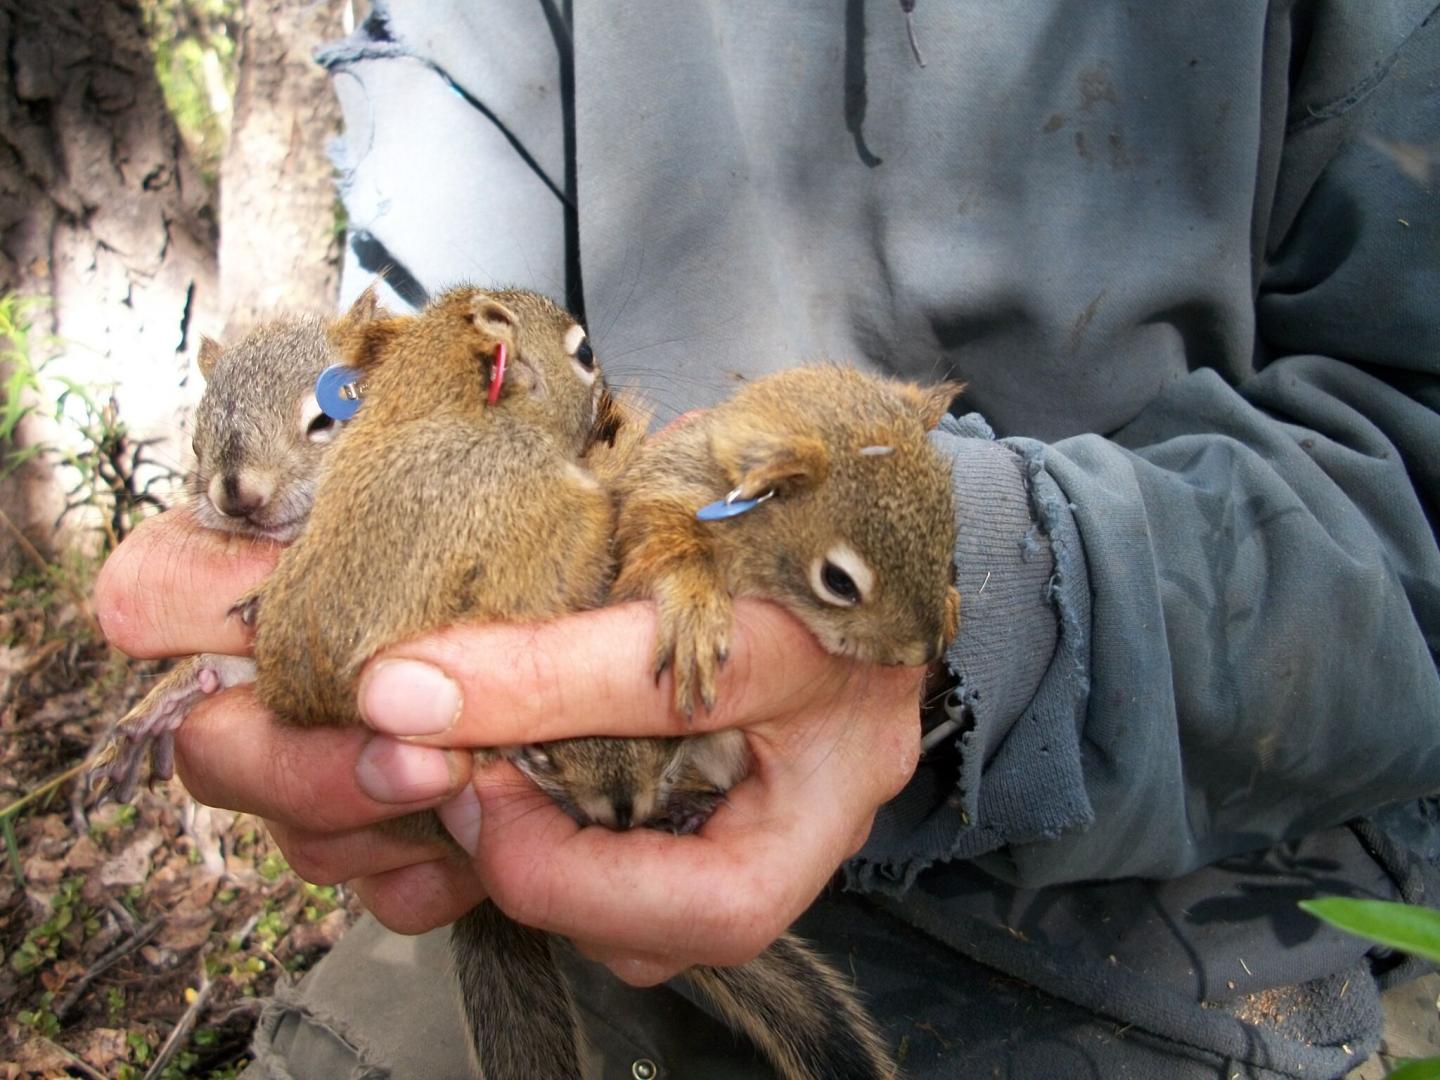 North American Red Squirrels